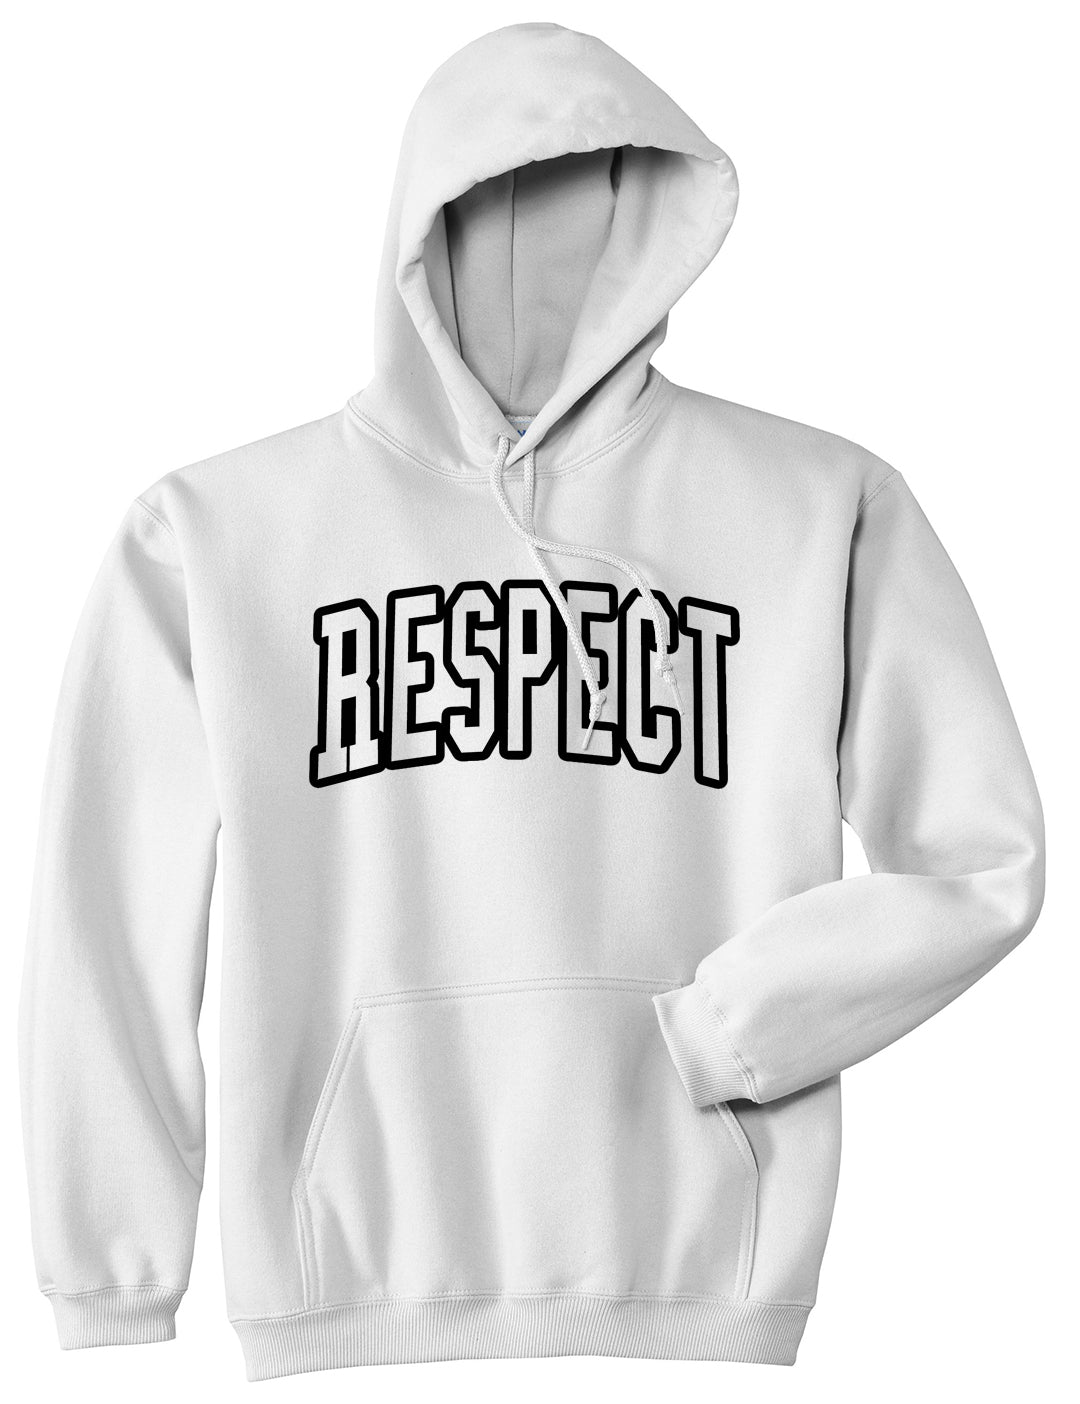 Respect Outline Mens Pullover Hoodie White